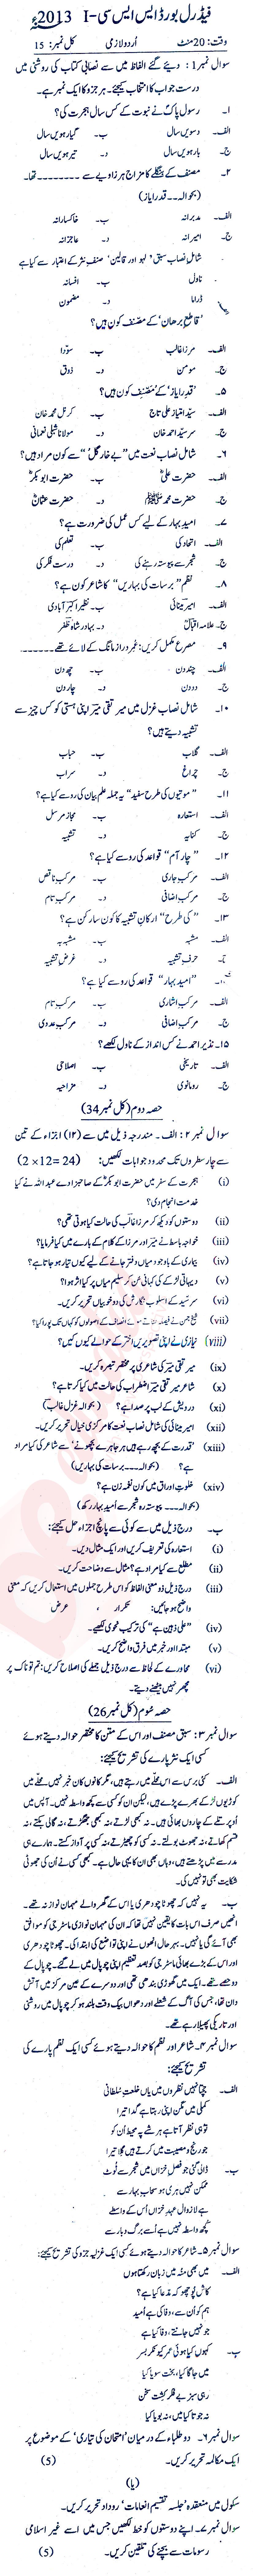 Urdu 9th class Past Paper Group 1 Federal BISE  2013